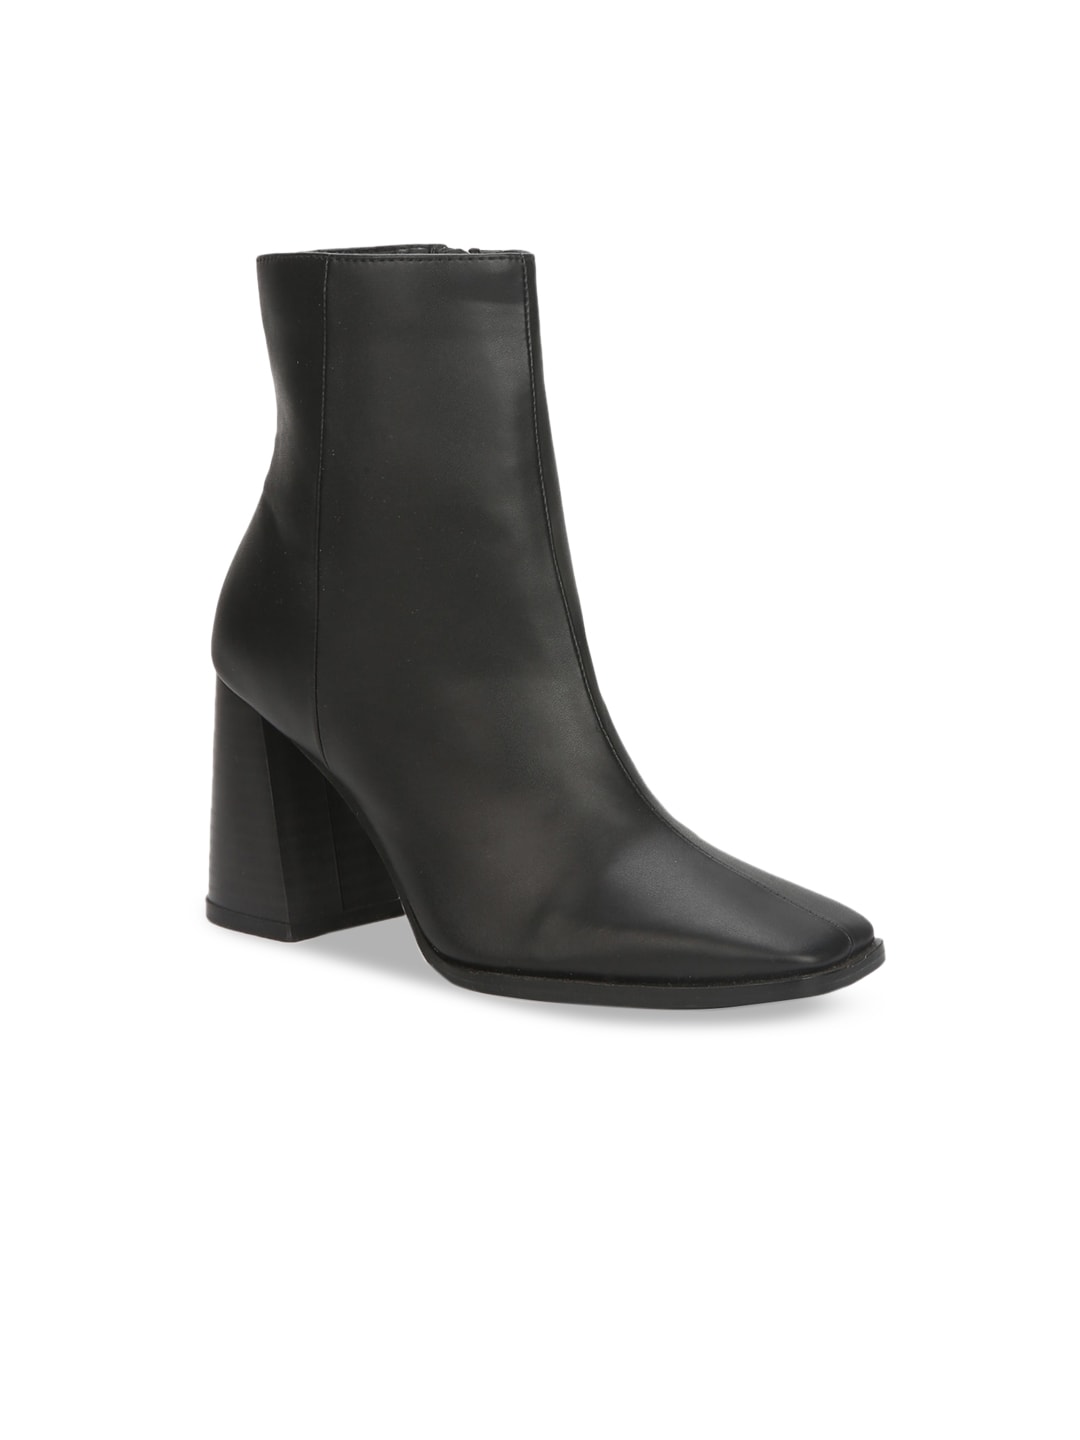 Truffle Collection Women Black Solid Heeled Boots Price in India